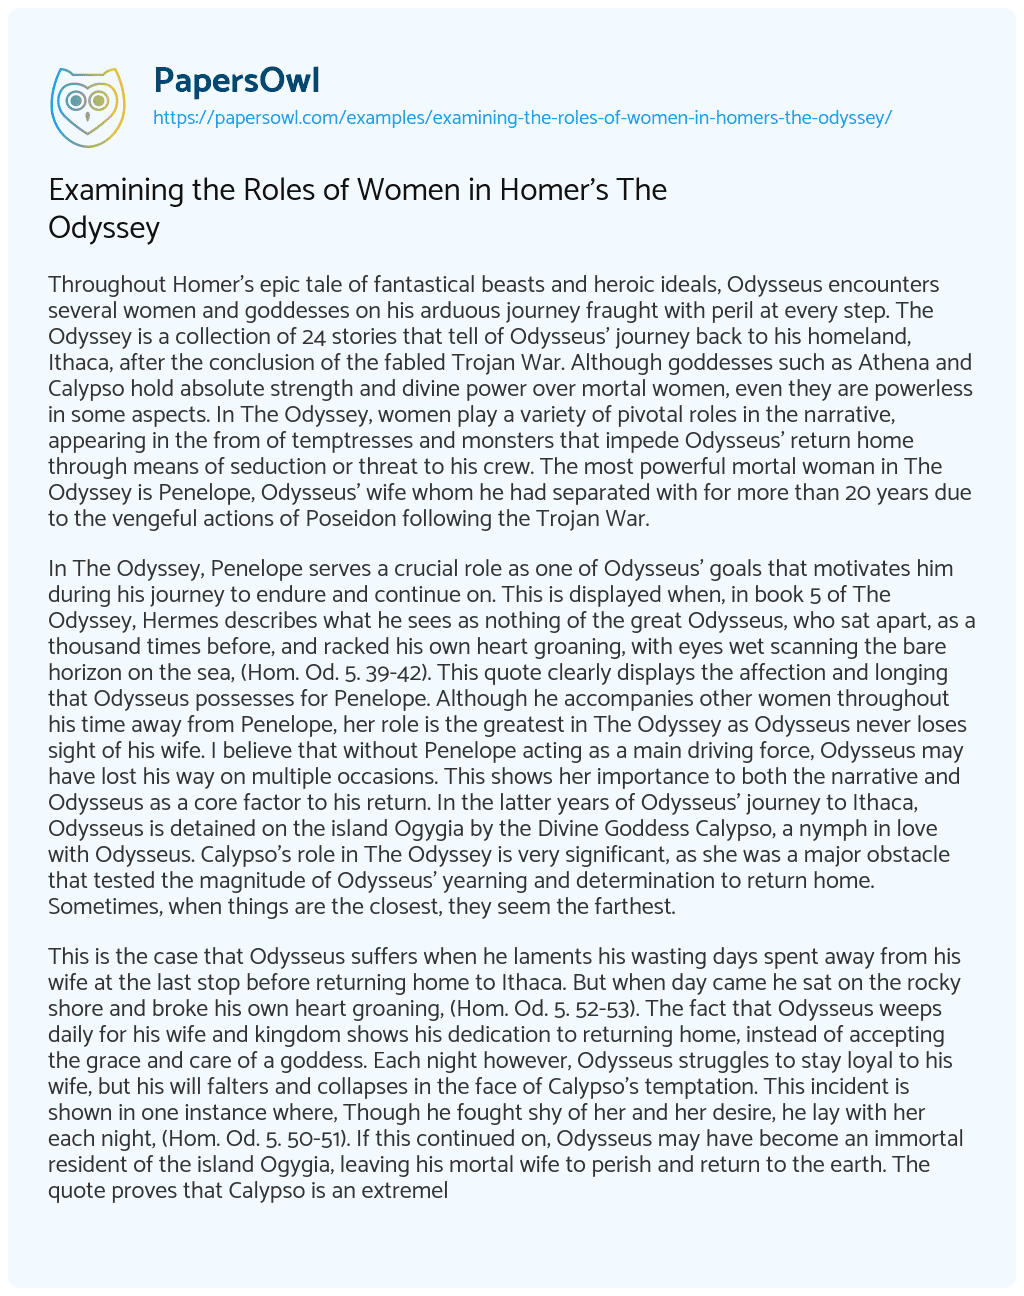 Essay on Examining the Roles of Women in Homer’s the Odyssey